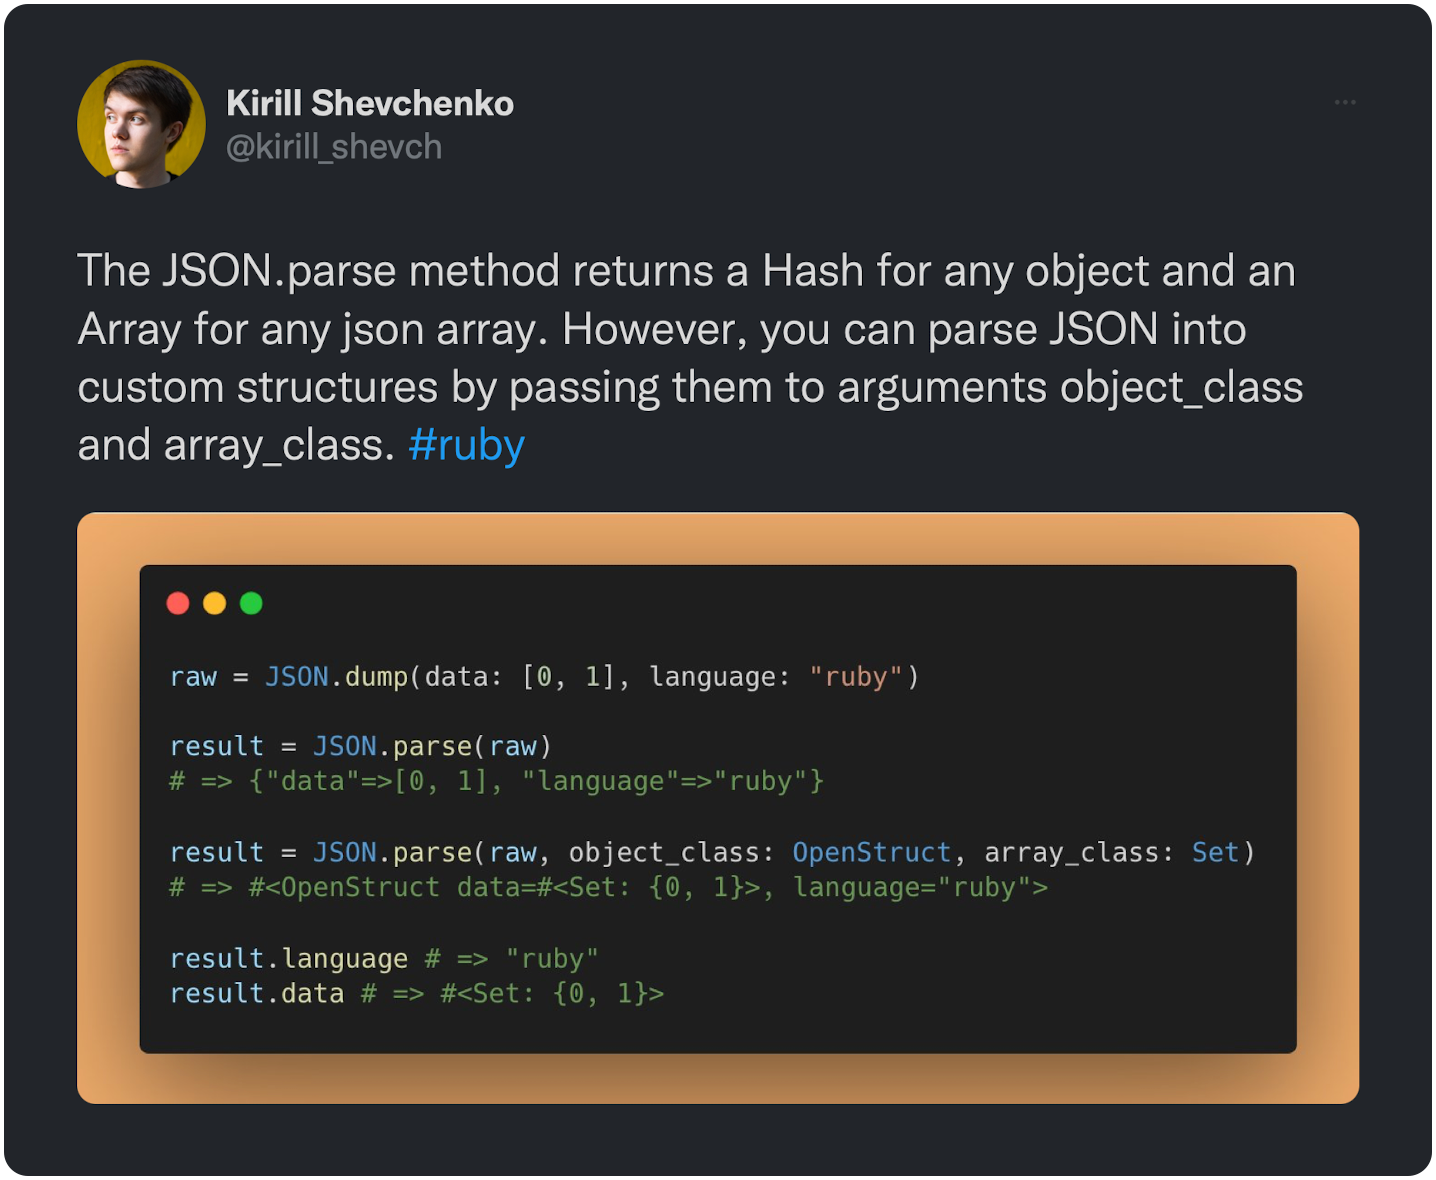 The JSON.parse method returns a Hash for any object and an Array for any json array. However, you can parse JSON into custom structures by passing them to arguments object_class and array_class.